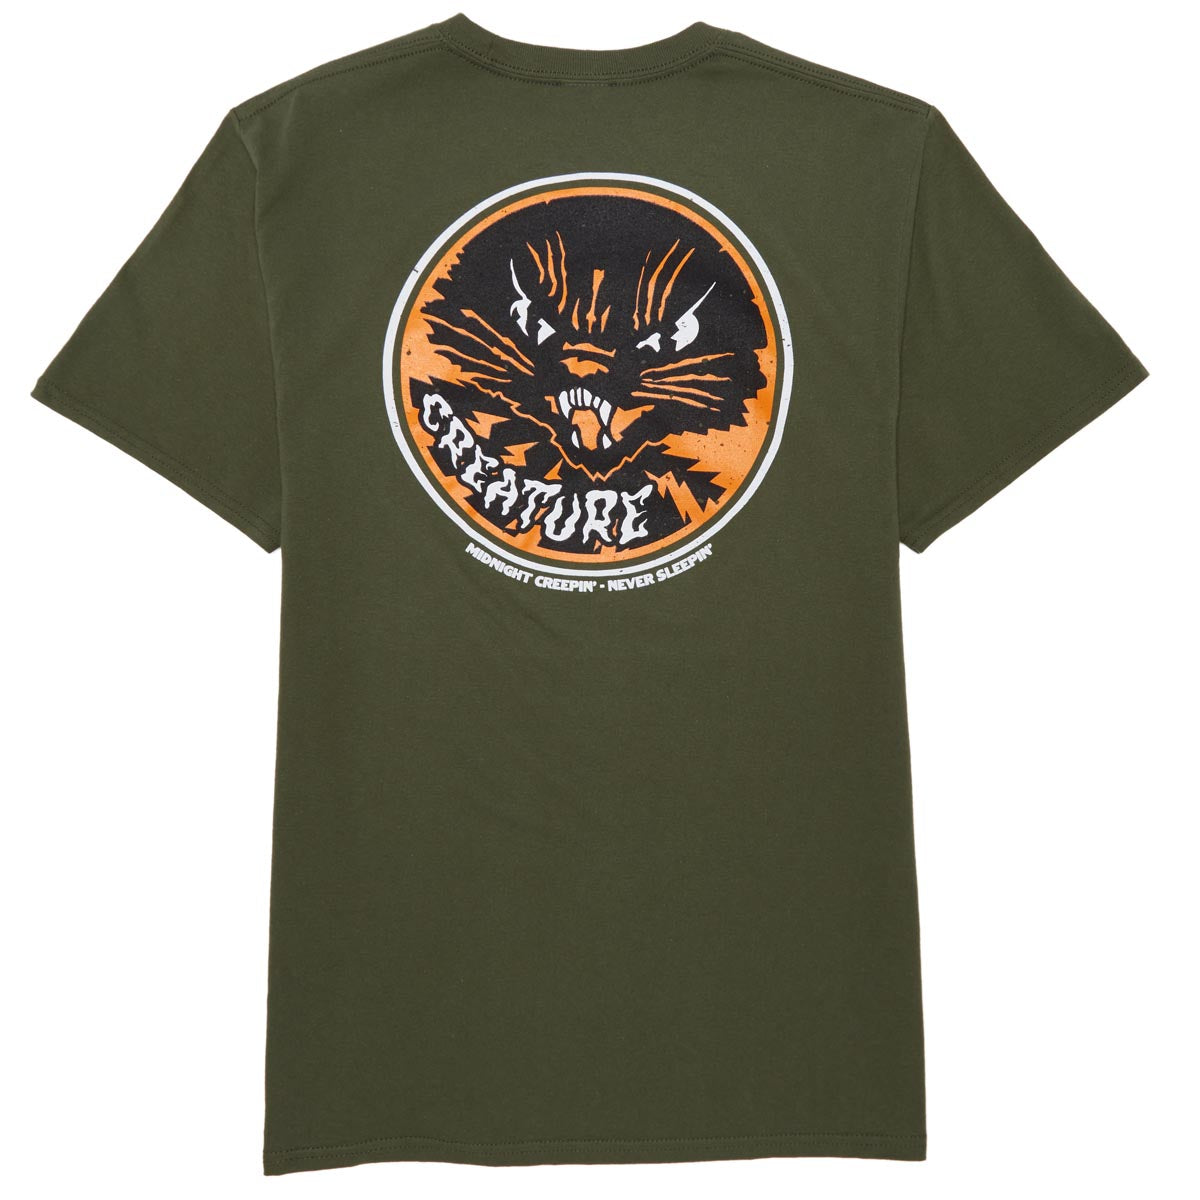 Creature The Creeper T-Shirt - Olive image 1